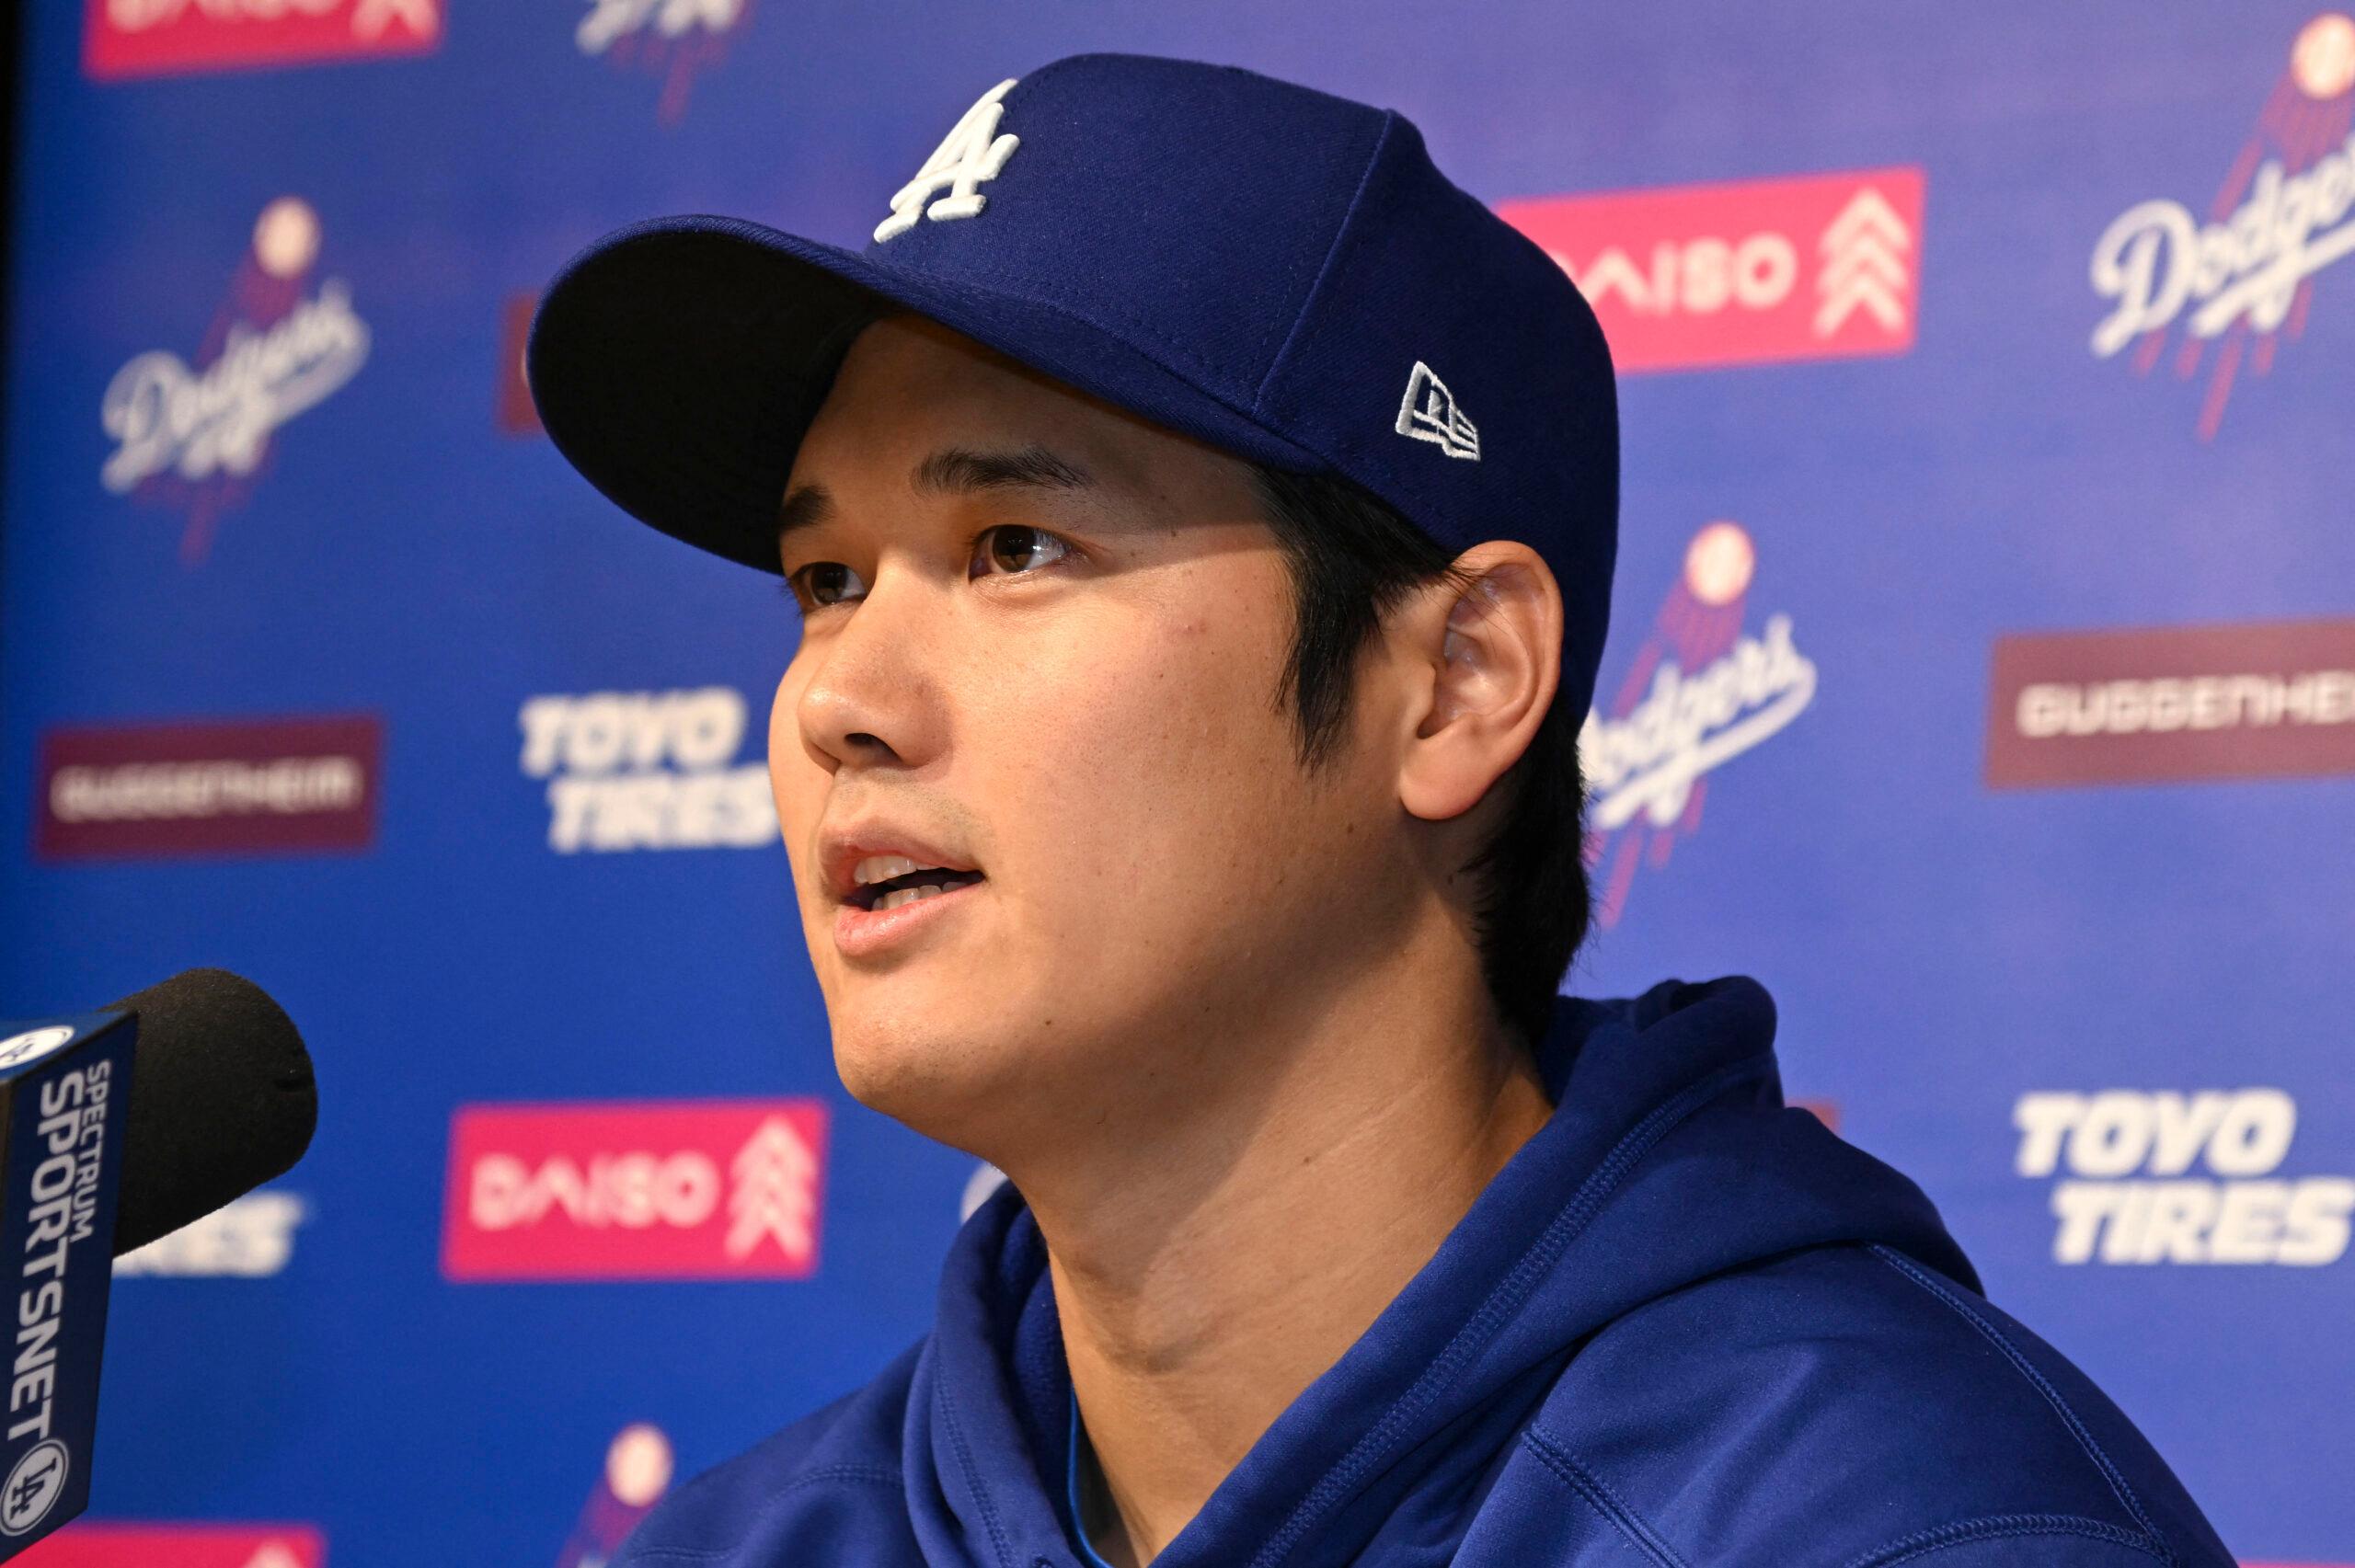 Shohei Ohtani speaks at a press conference